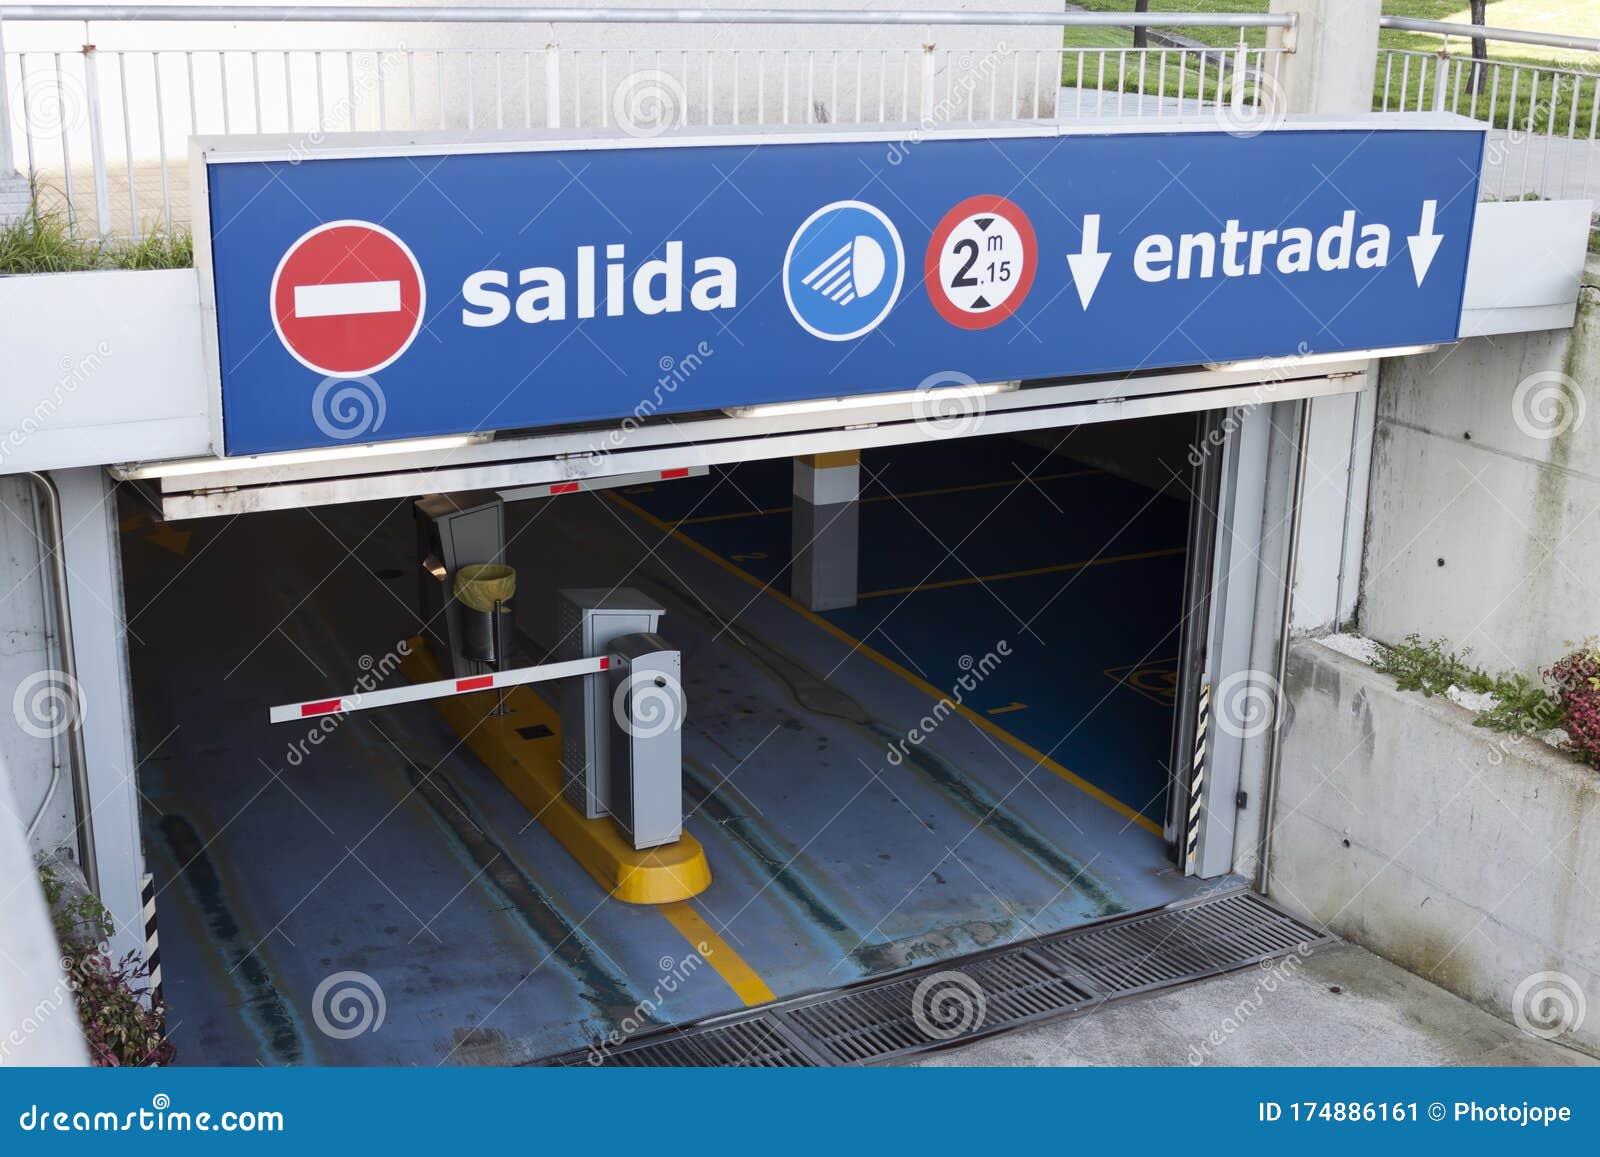 salida, entrada sign at underground parking entrance. exit, entry in spanish